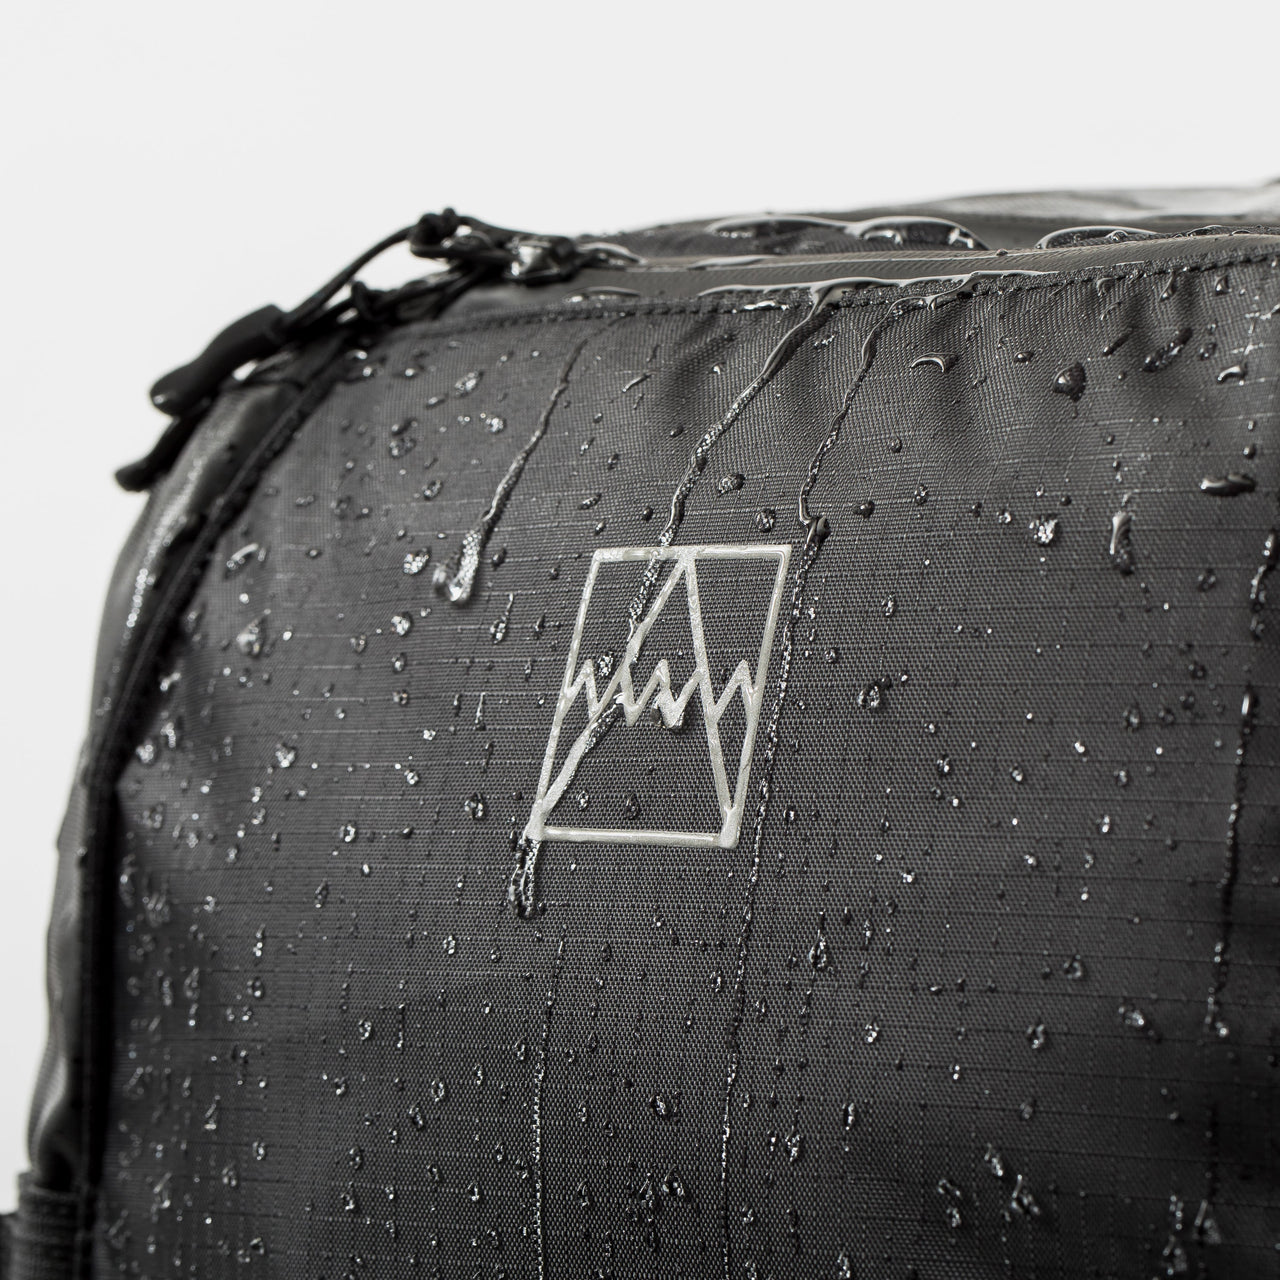 Adventure Bag in All Black close up with water drips